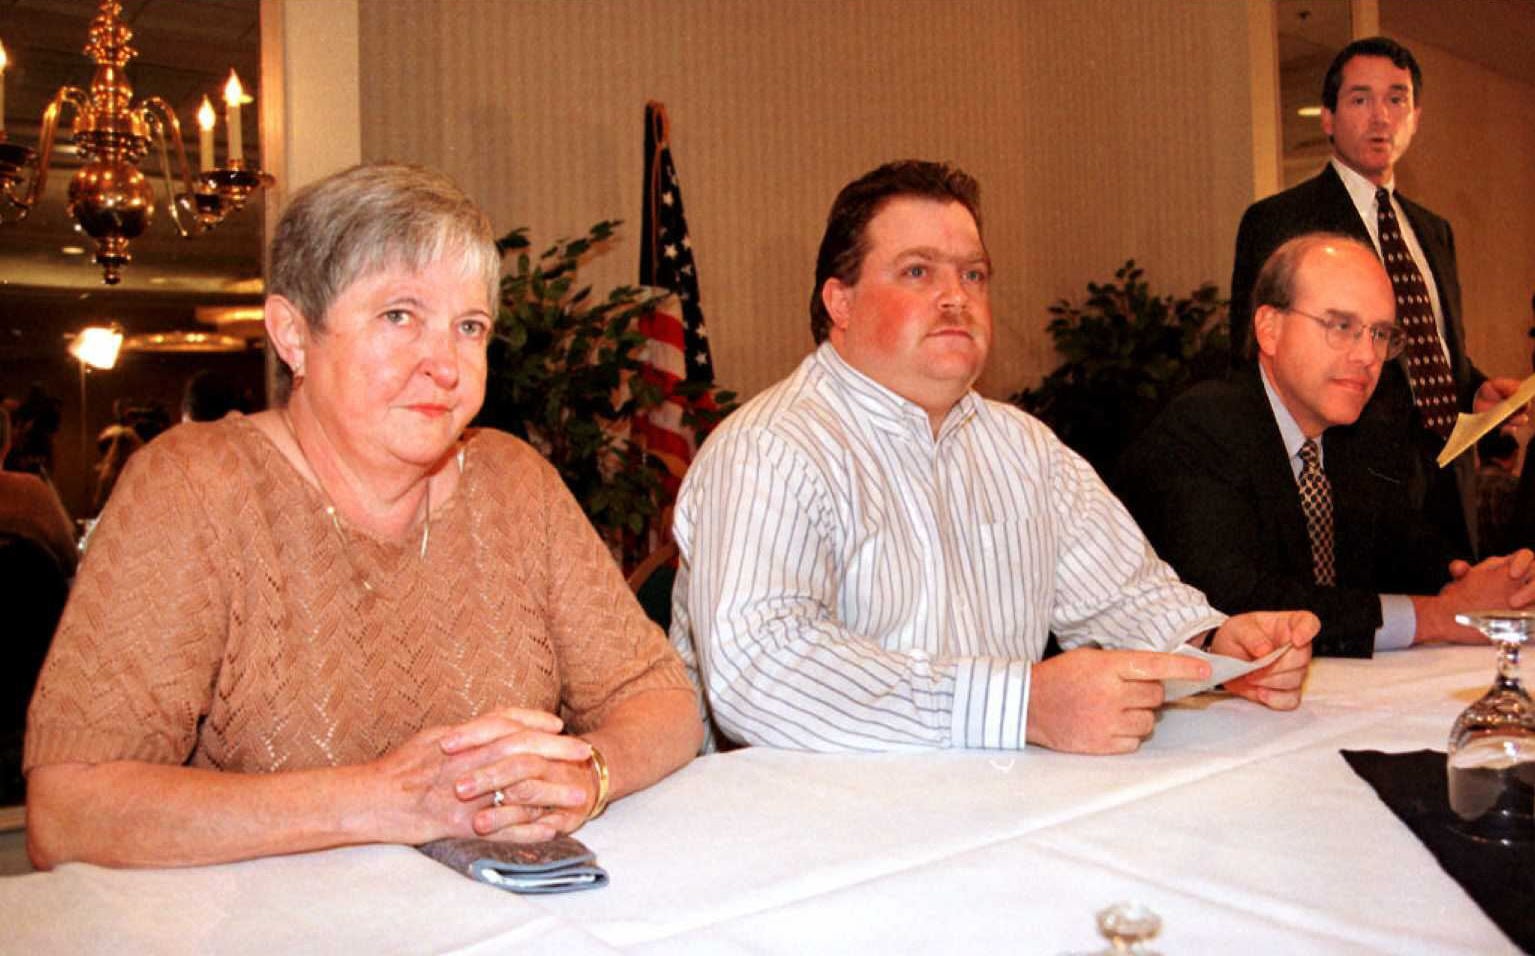 ATLANTA, GA - OCTOBER 28:  Richard Jewell (C) his mother Barbara (L)  and attorneys Watson Bryant (R) and Wayne Grant (far R) look on during a press conference 28 October in Atlanta, Ga.  Jewell was cleared as a suspect in the July 27 bombing of Centennial Olympic Park.  (Photo credit should read DOUG COLLIER/AFP/Getty Images)